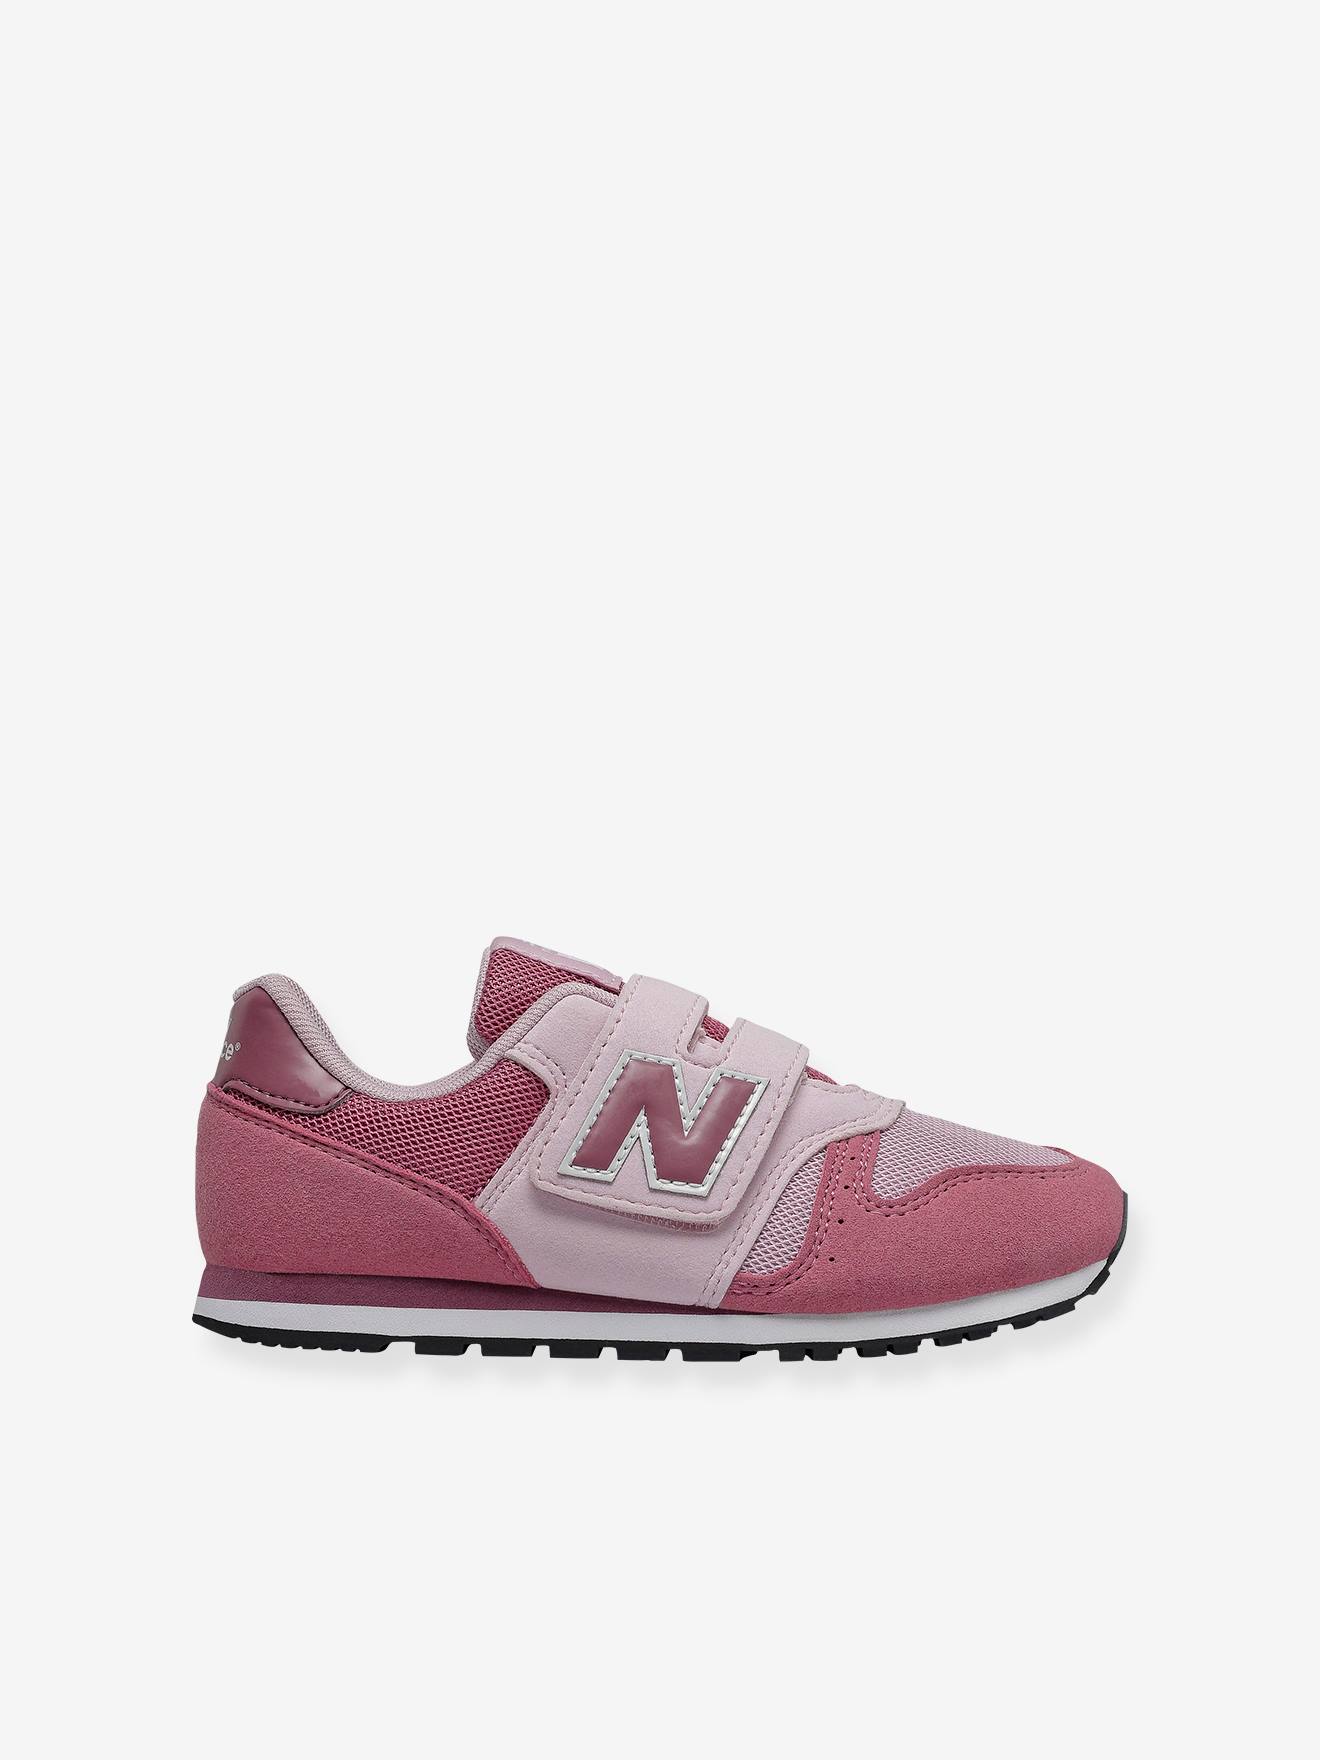 Baskets cuir scratchées fille YV373SP NEW BALANCE rose clair - New ...